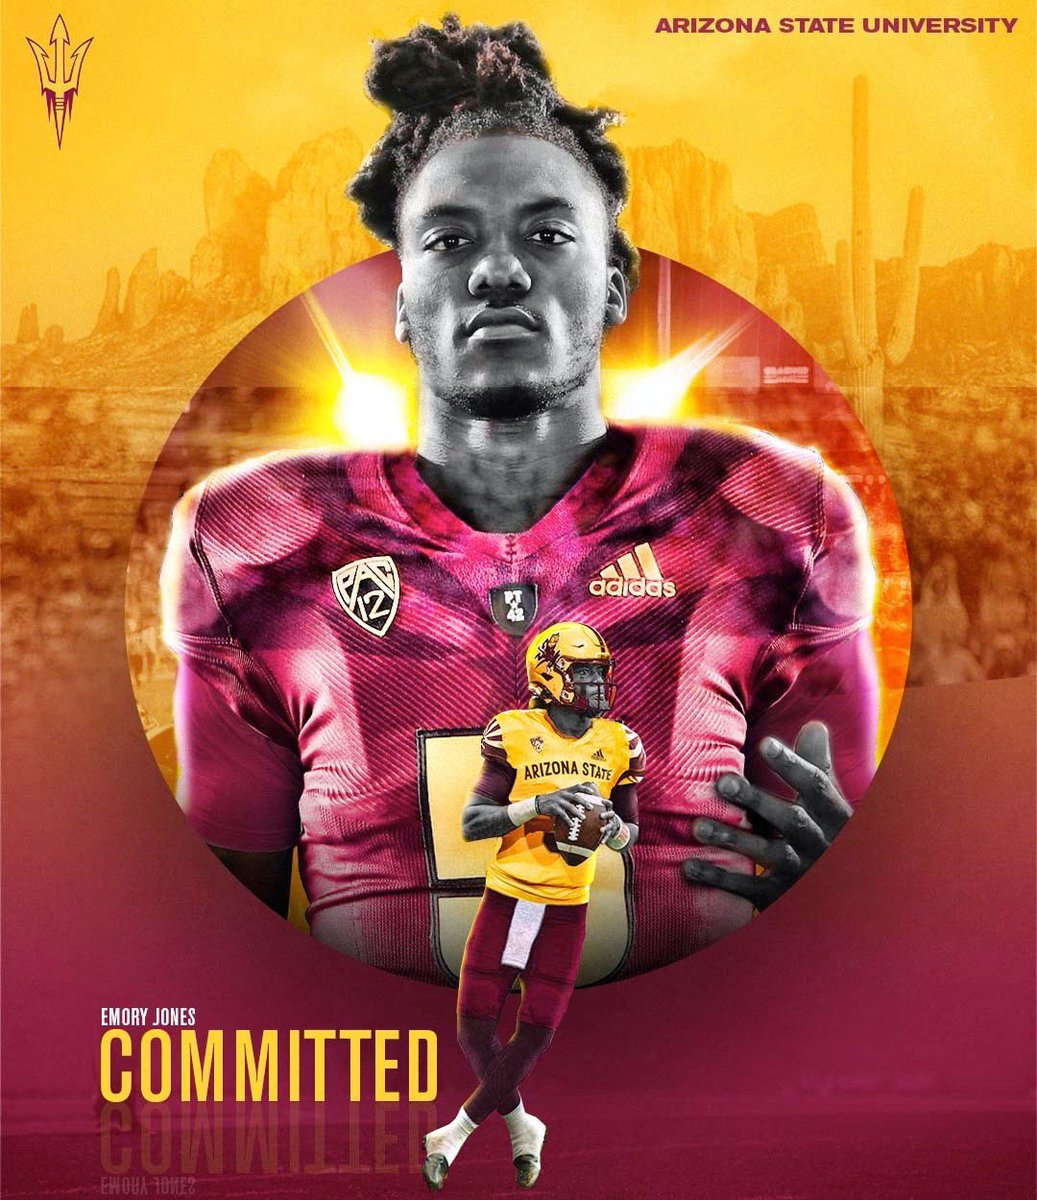 #ForksUp 🔱 Let’s get it!!